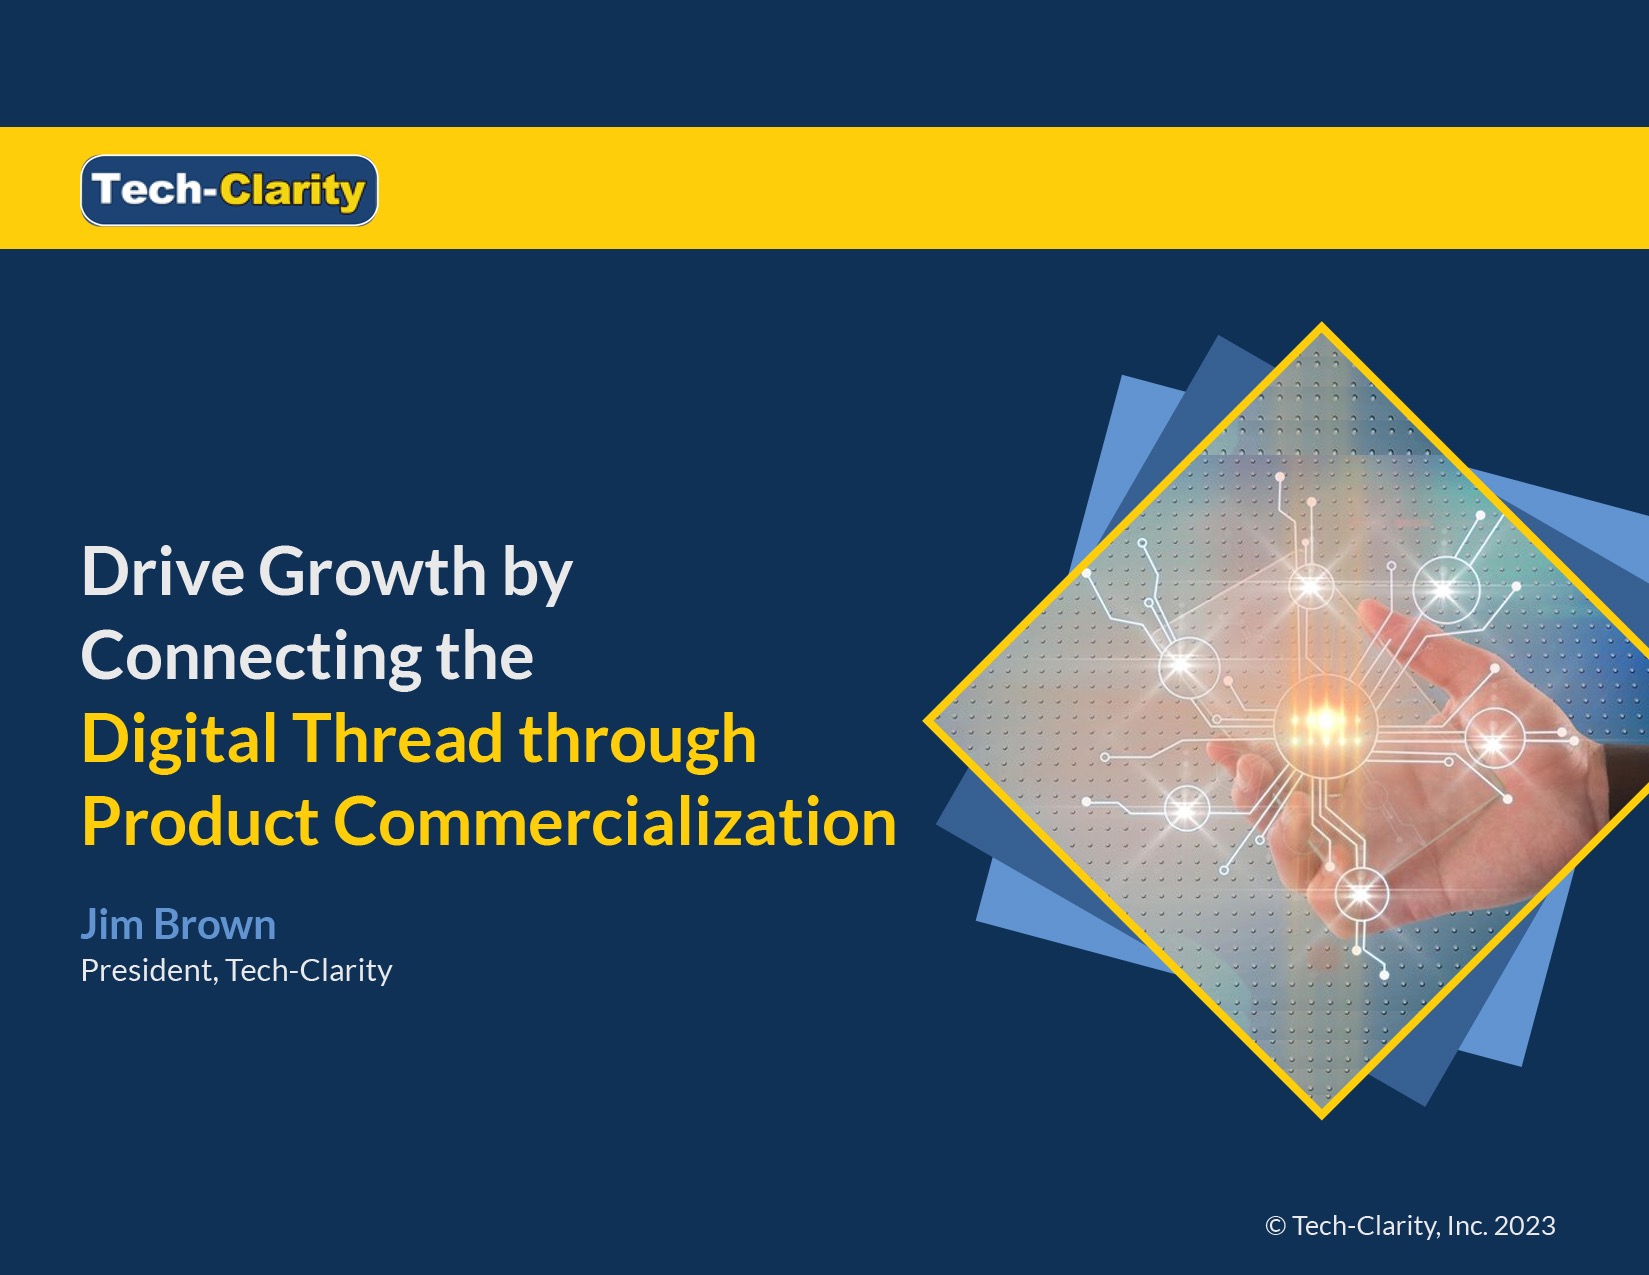 Product Commercialization